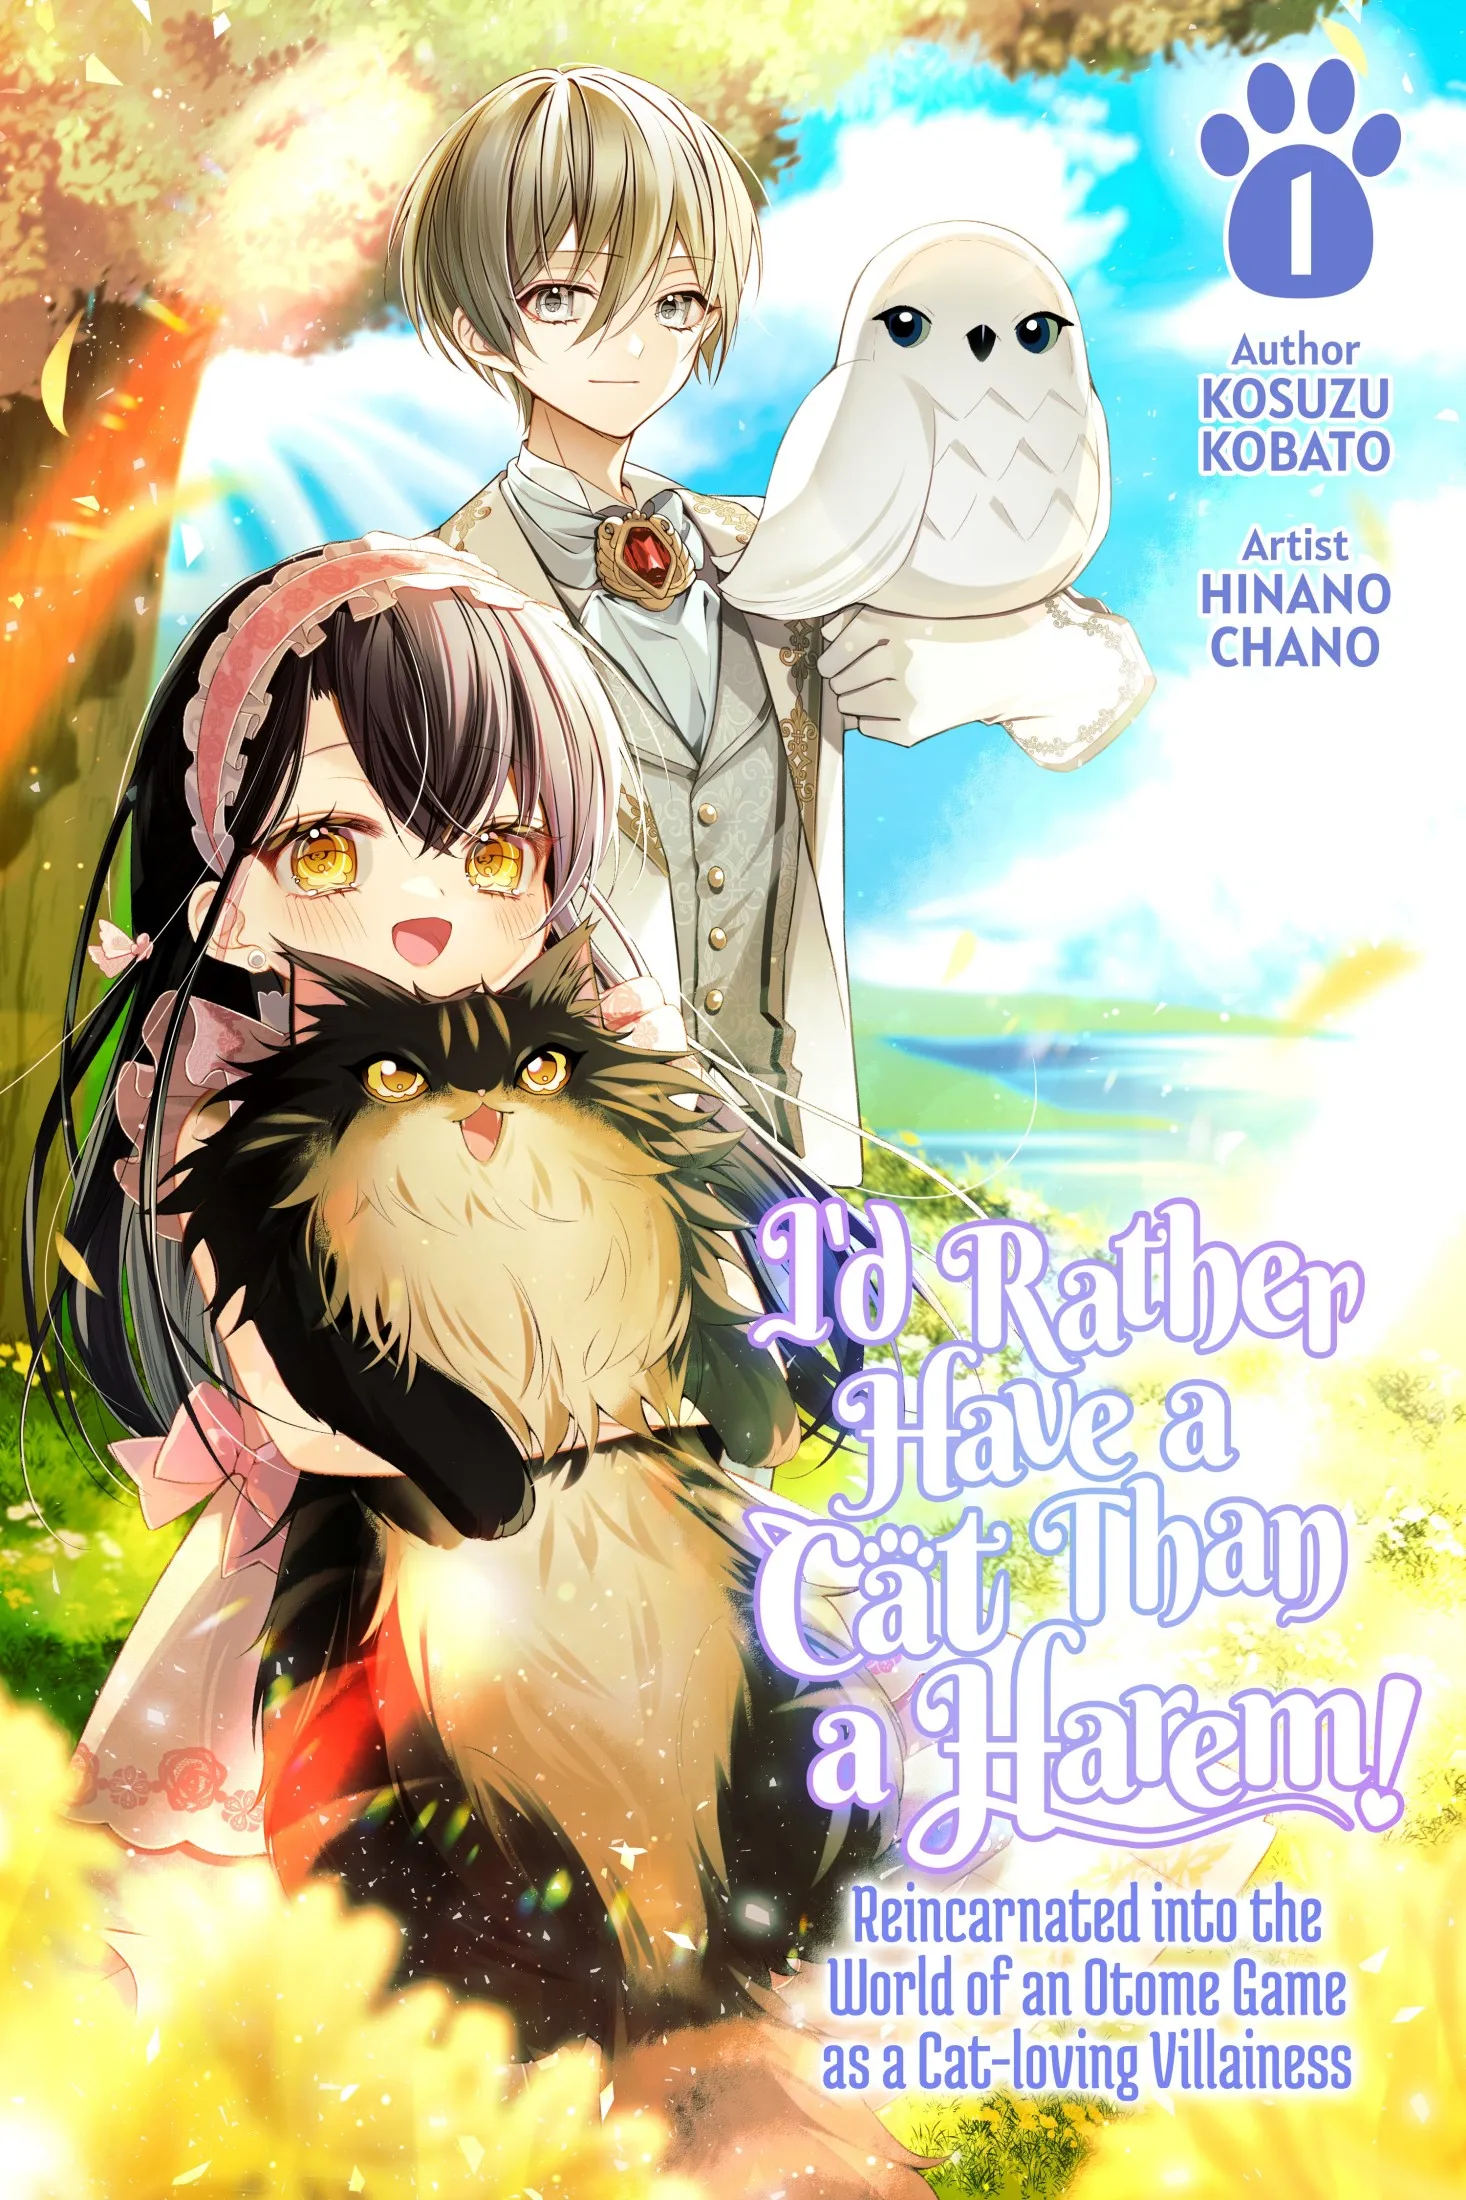 Reincarnated into the World of an Otome Game as a Cat-loving Villainess Vol.1 (I’d Rather Have a Cat than a Harem! #1)